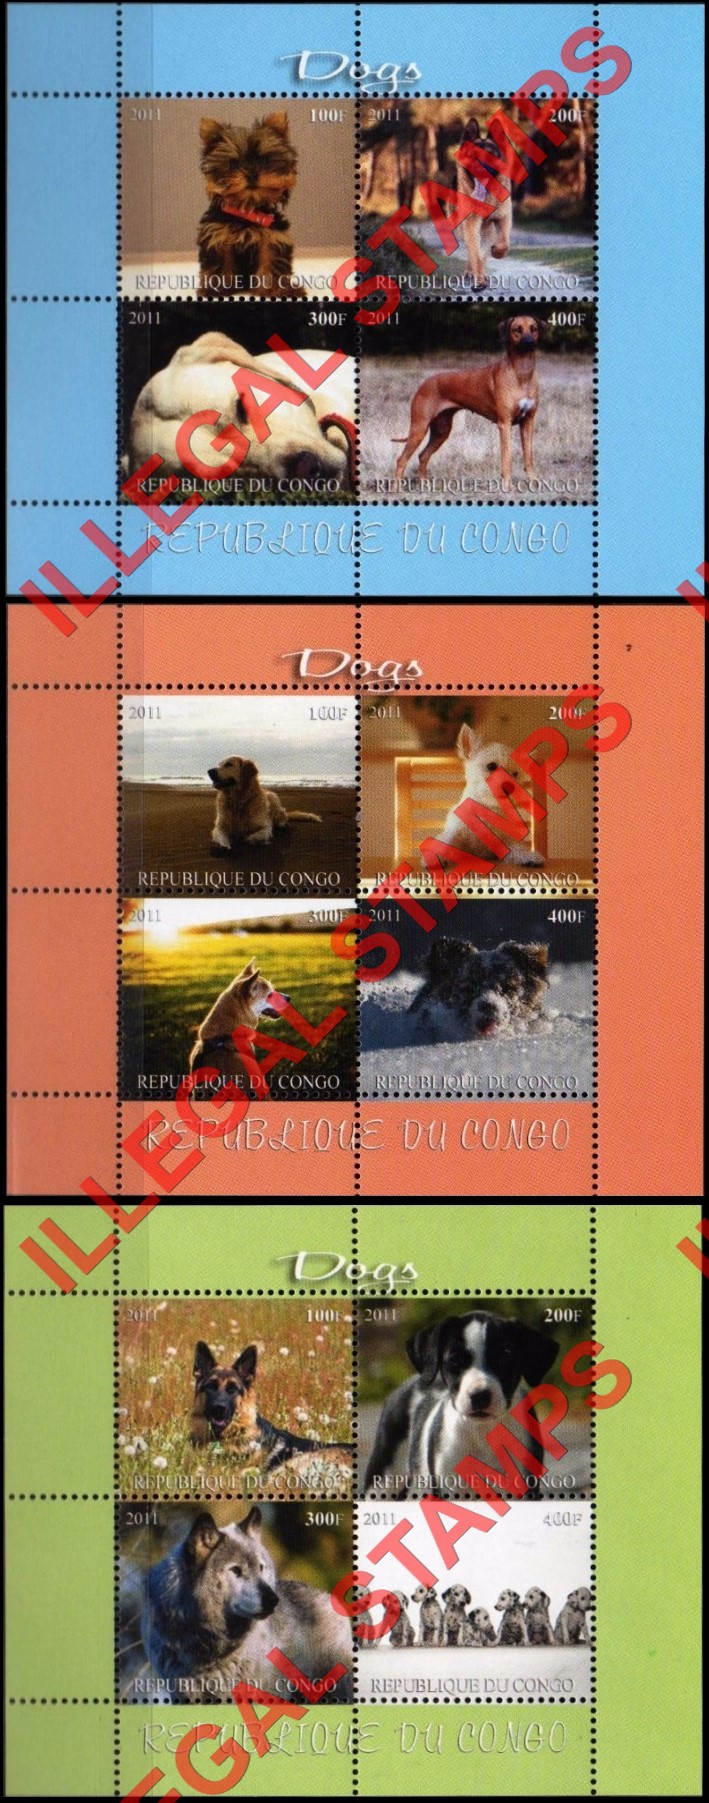 Congo Republic 2011 Dogs Illegal Stamp Souvenir Sheets of 4